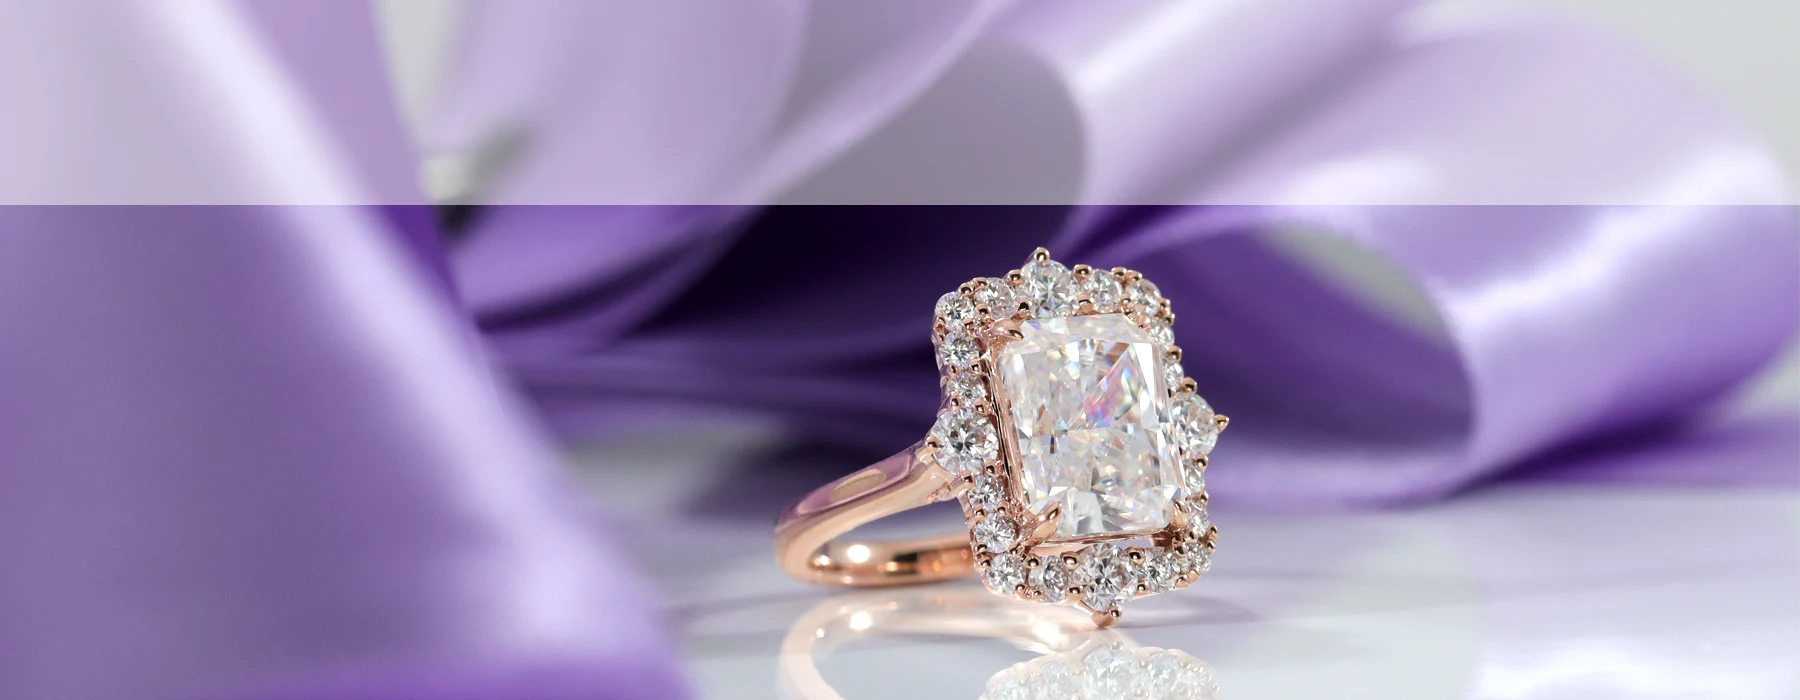 vintage halo and hidden halo engagement rings featuring lab diamonds on sale at Quorri Canada